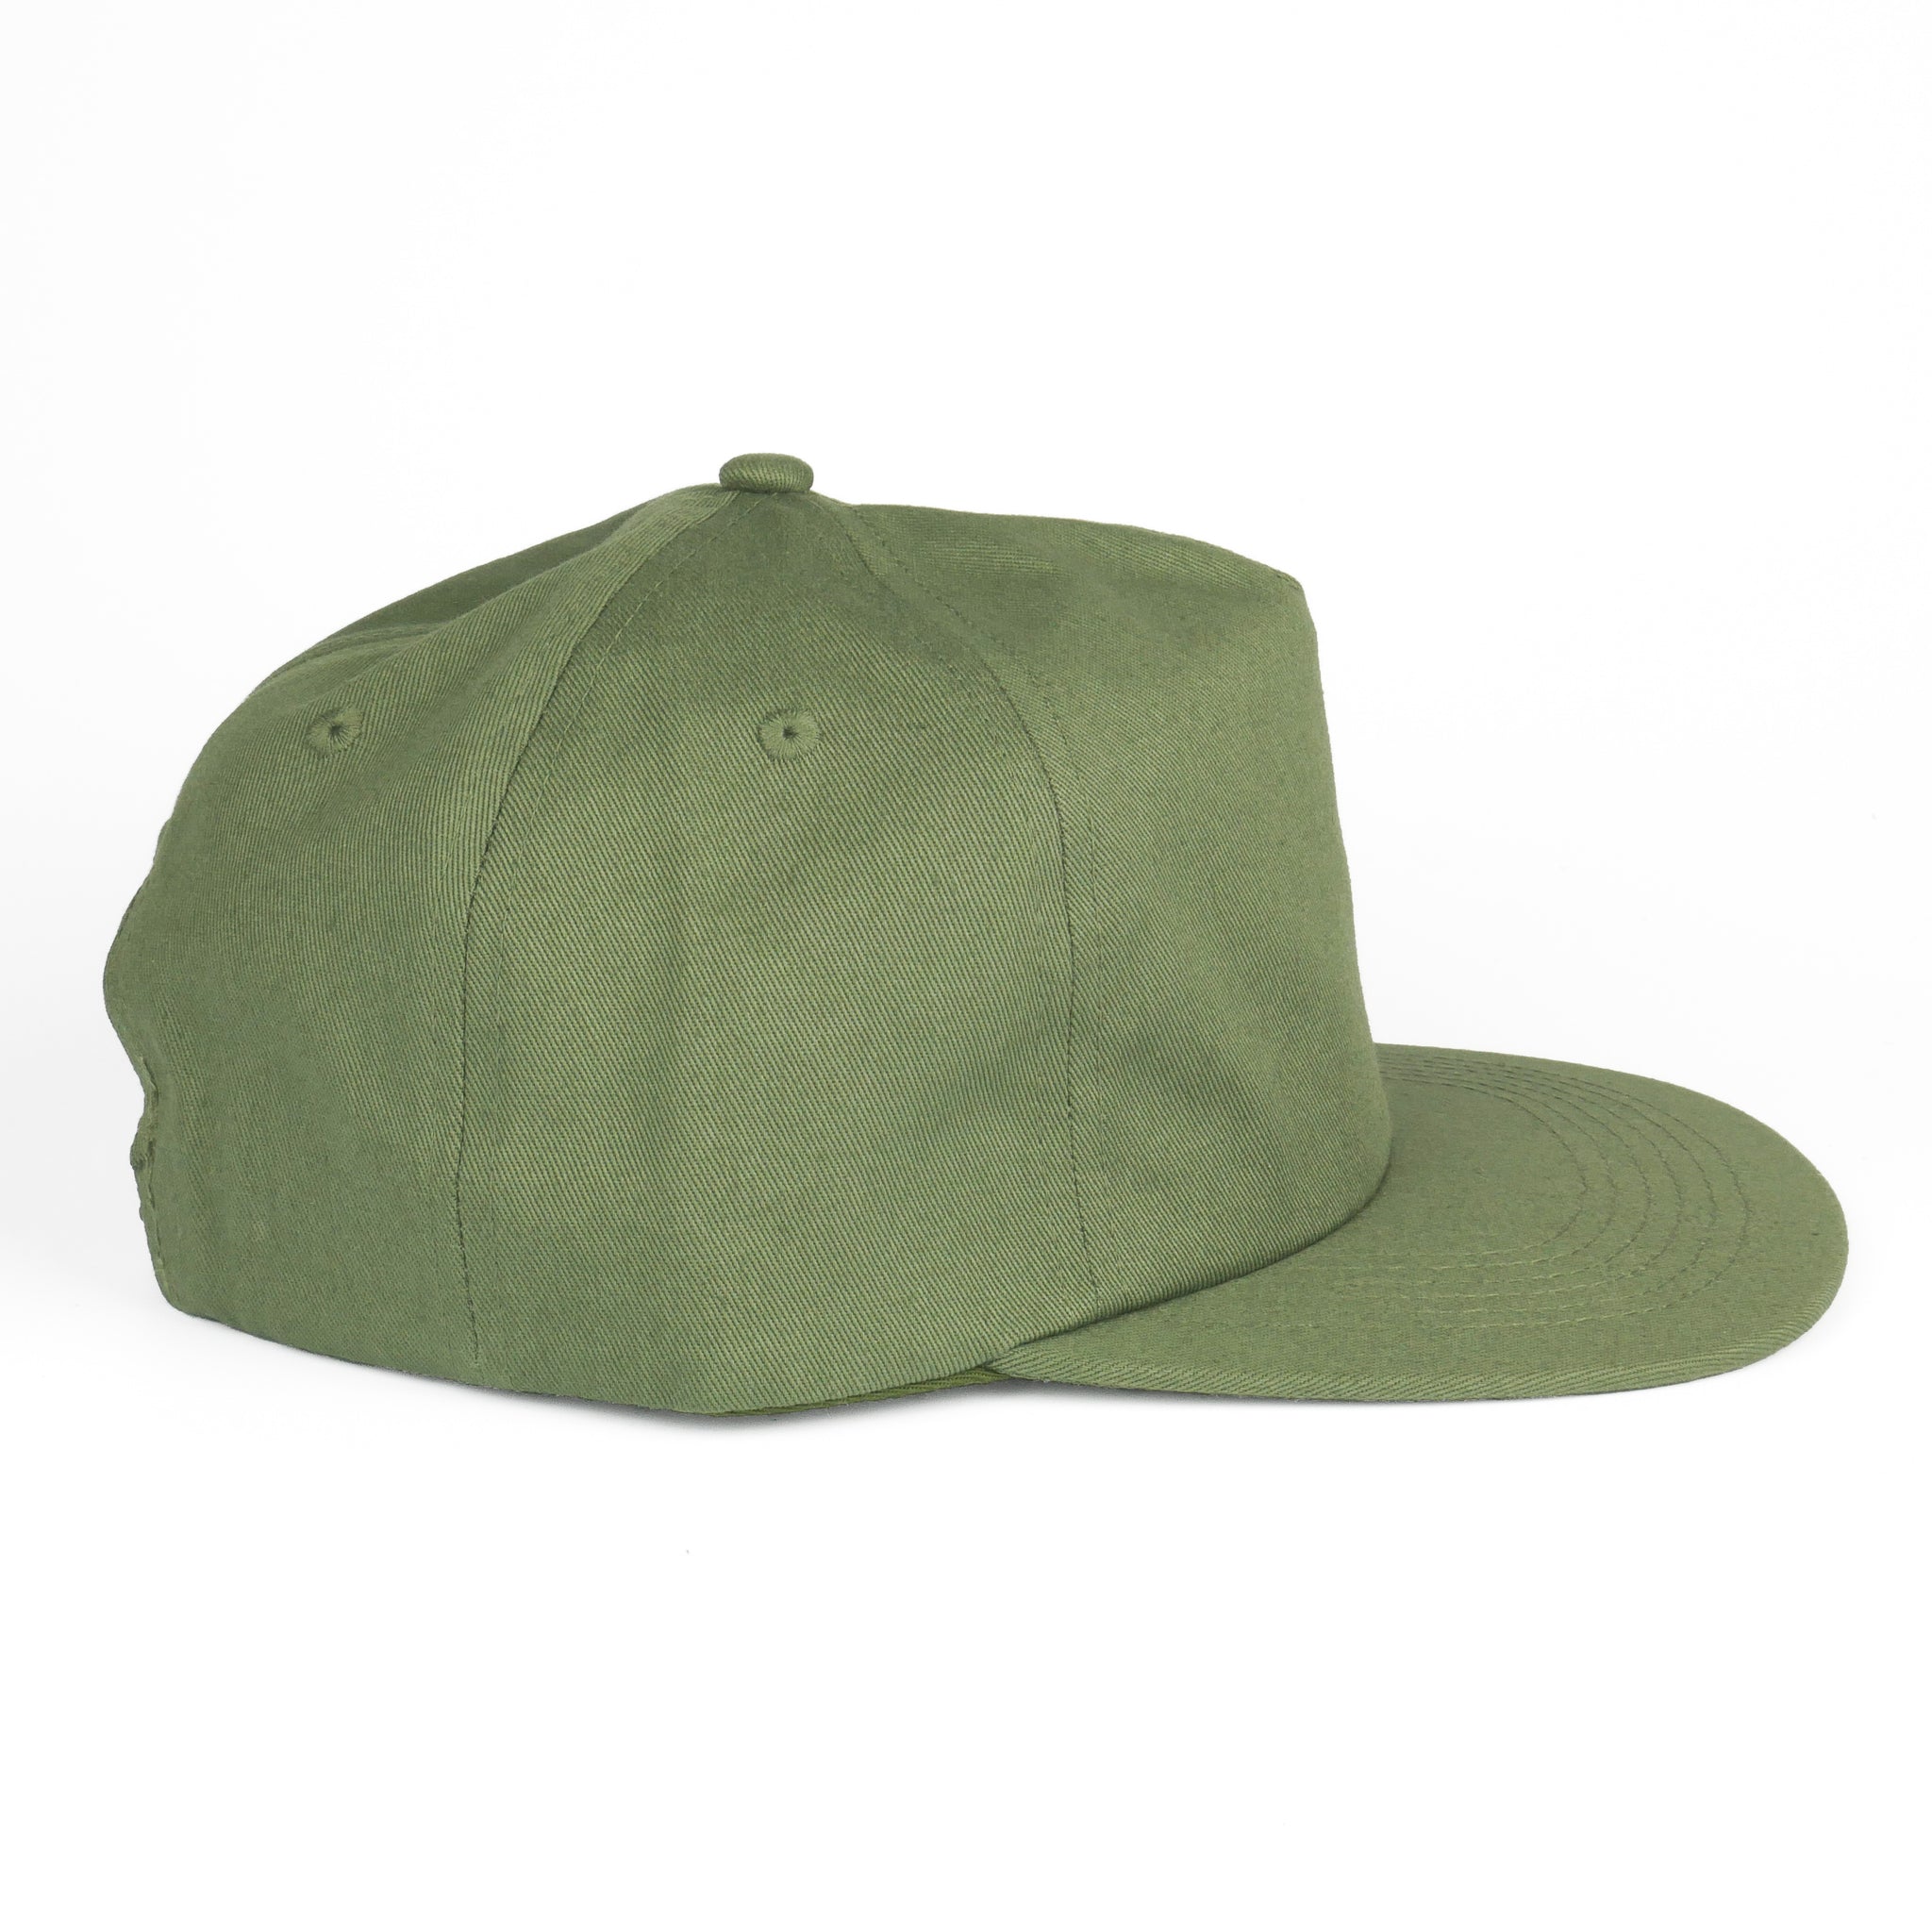 The High 5 - 100% Cotton - Olive